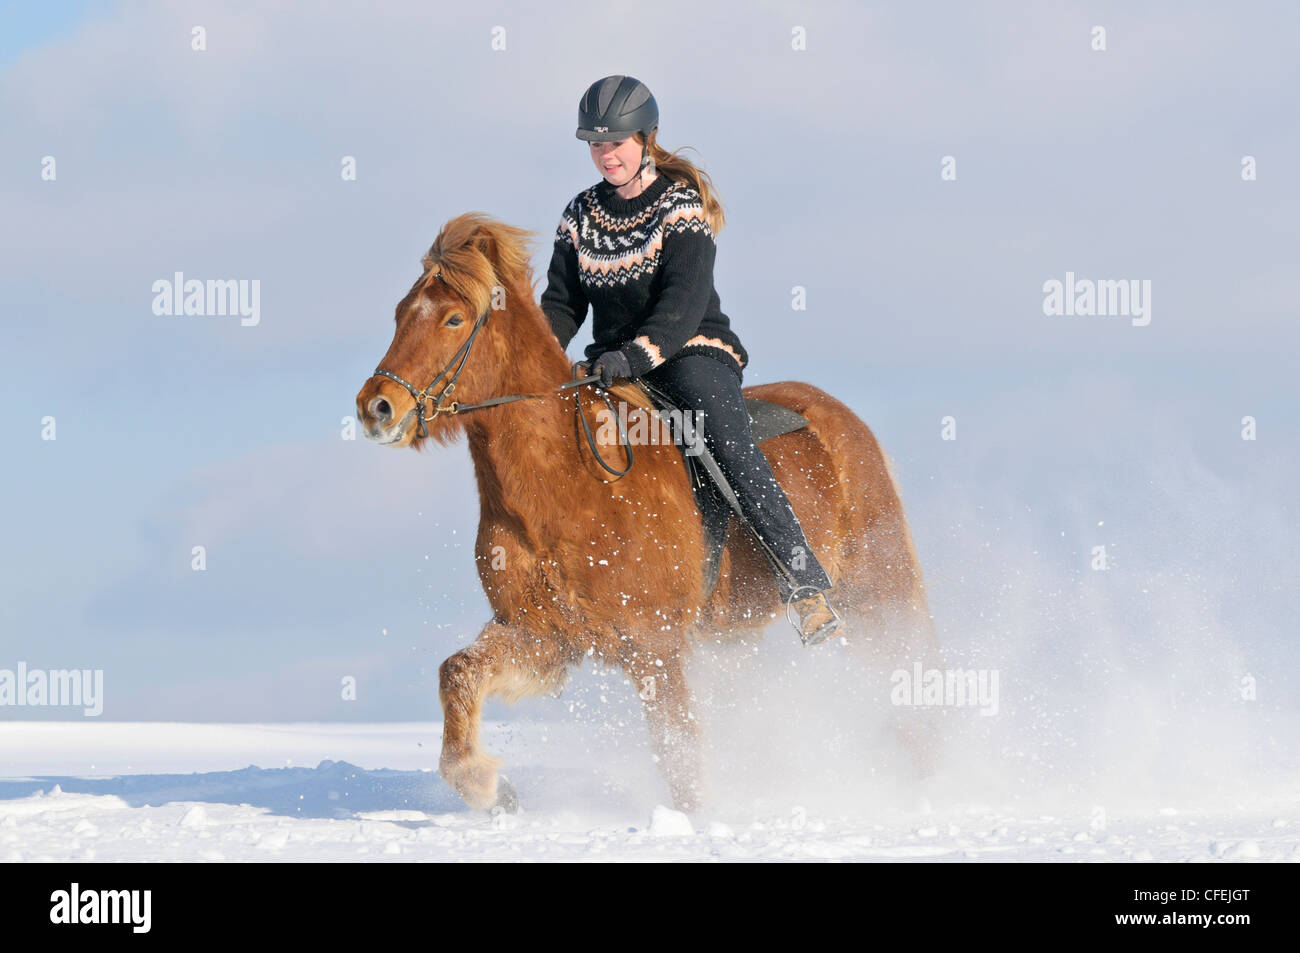 Girl riding on back of an Icelandic horse in deep snow Stock Photo